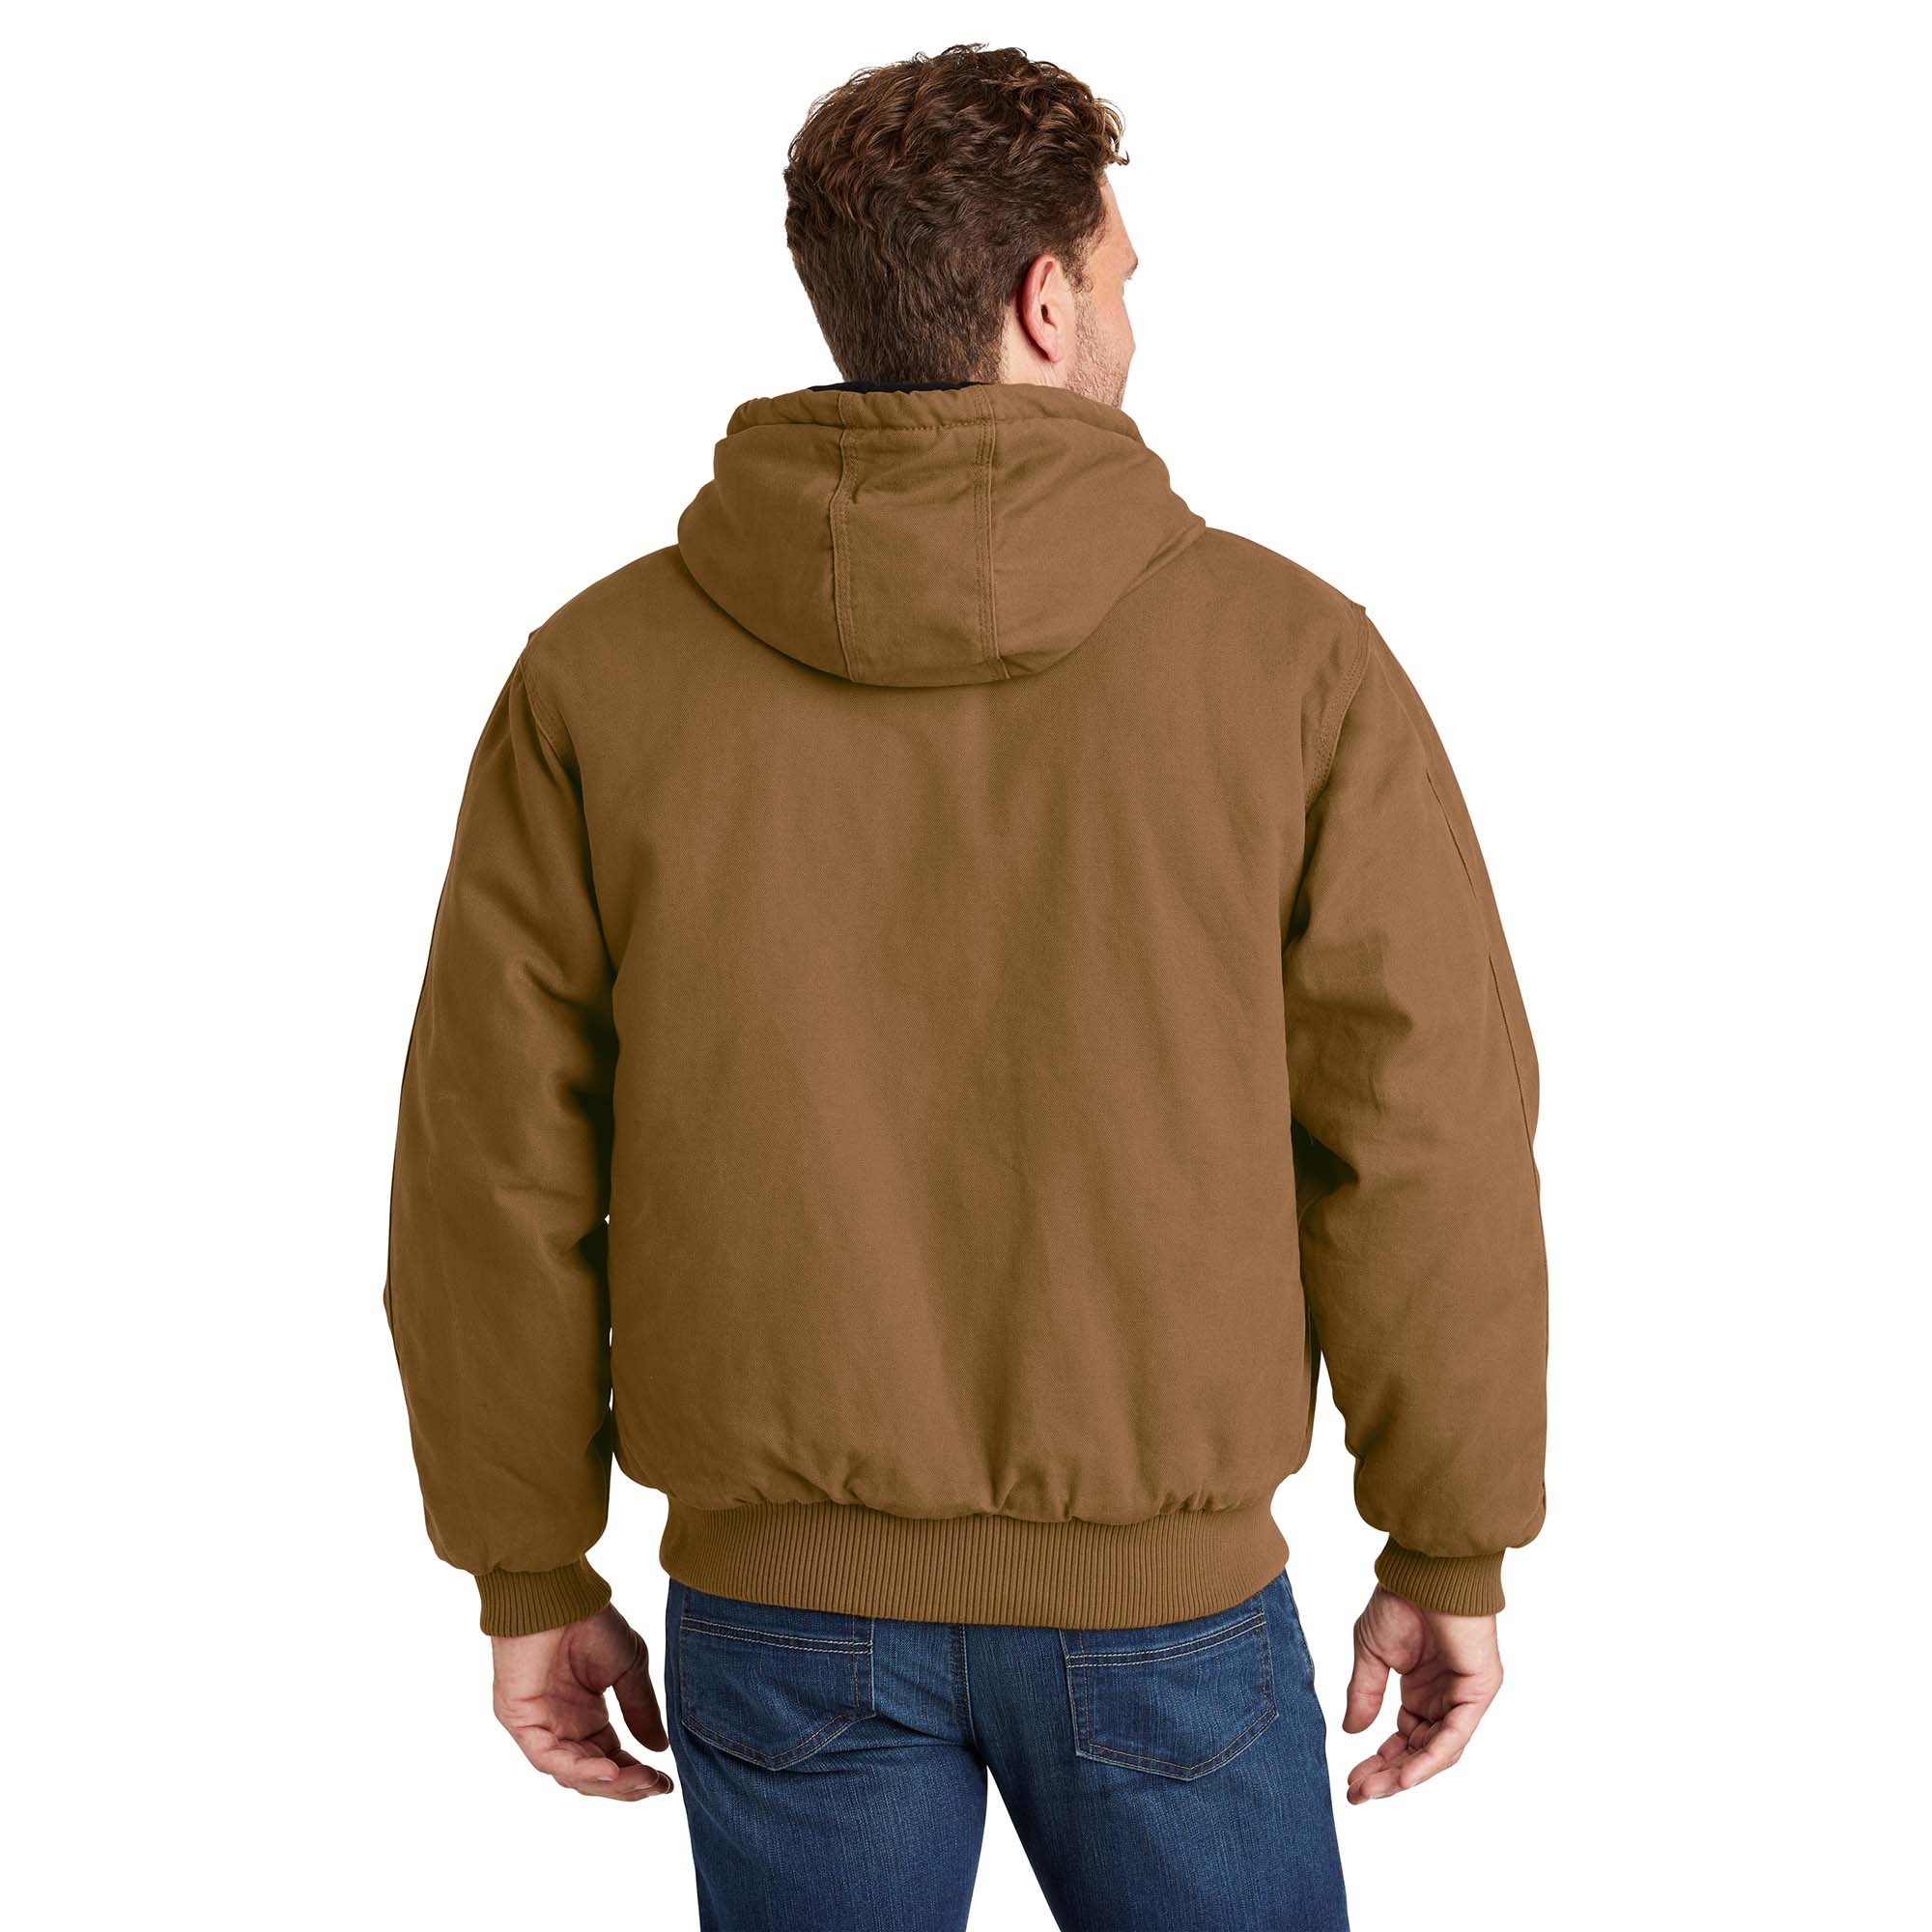 CornerStone CSJ41 Washed Duck Cloth Insulated Hooded Work Jacket - Duck  Brown